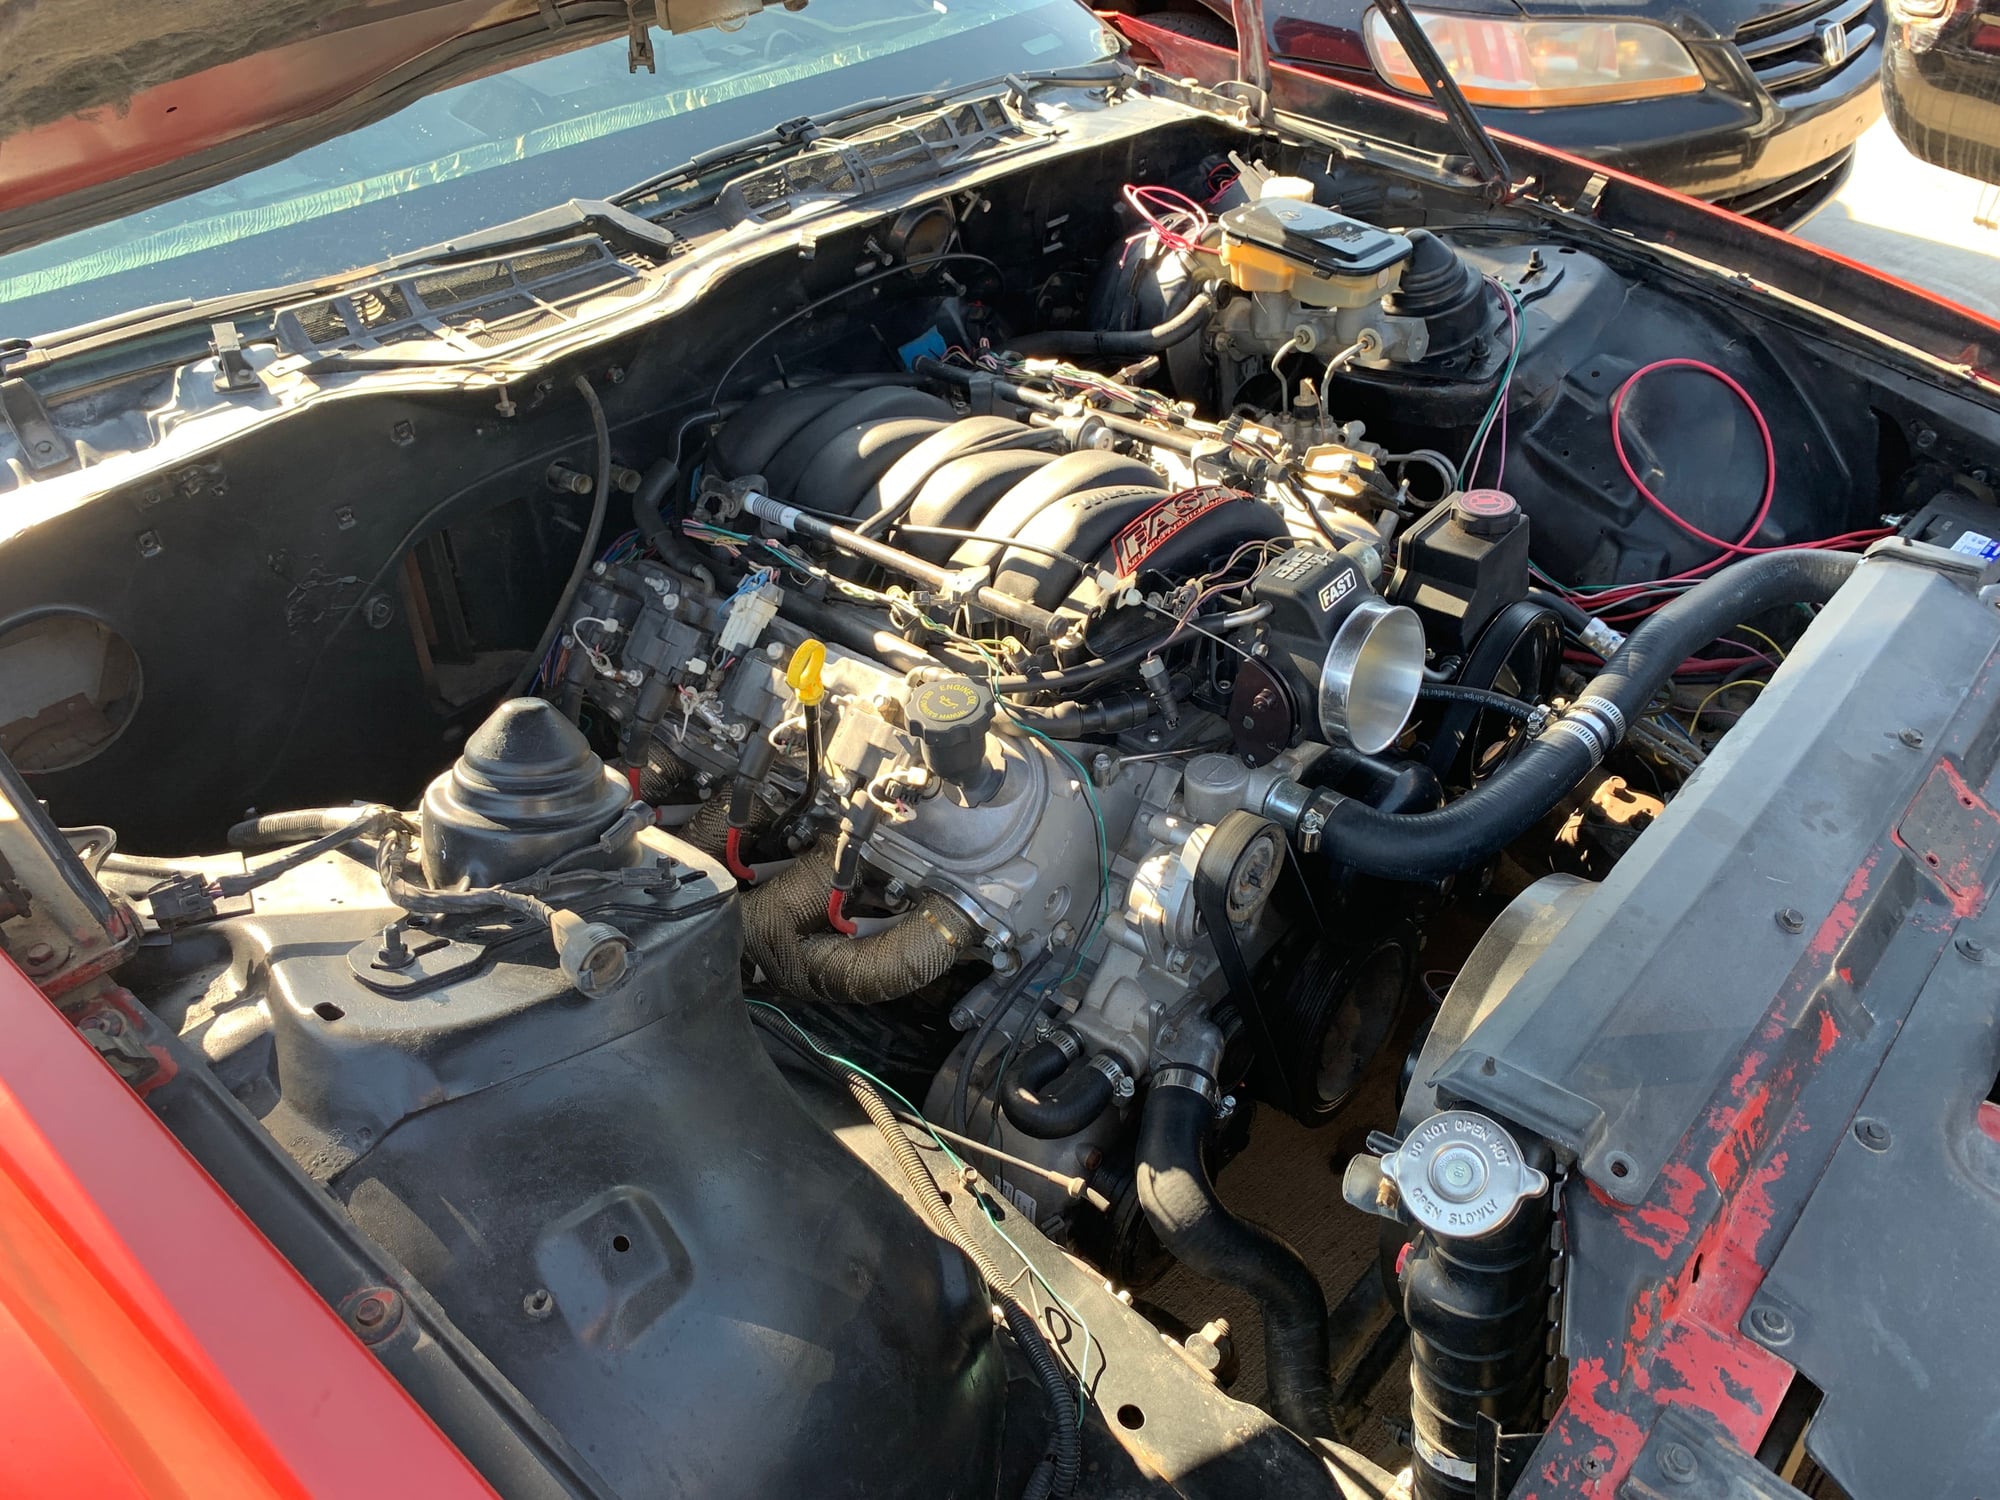 1985 Camaro Z28 Ls1 T56 swapped $9000 - Third Generation F-Body Message